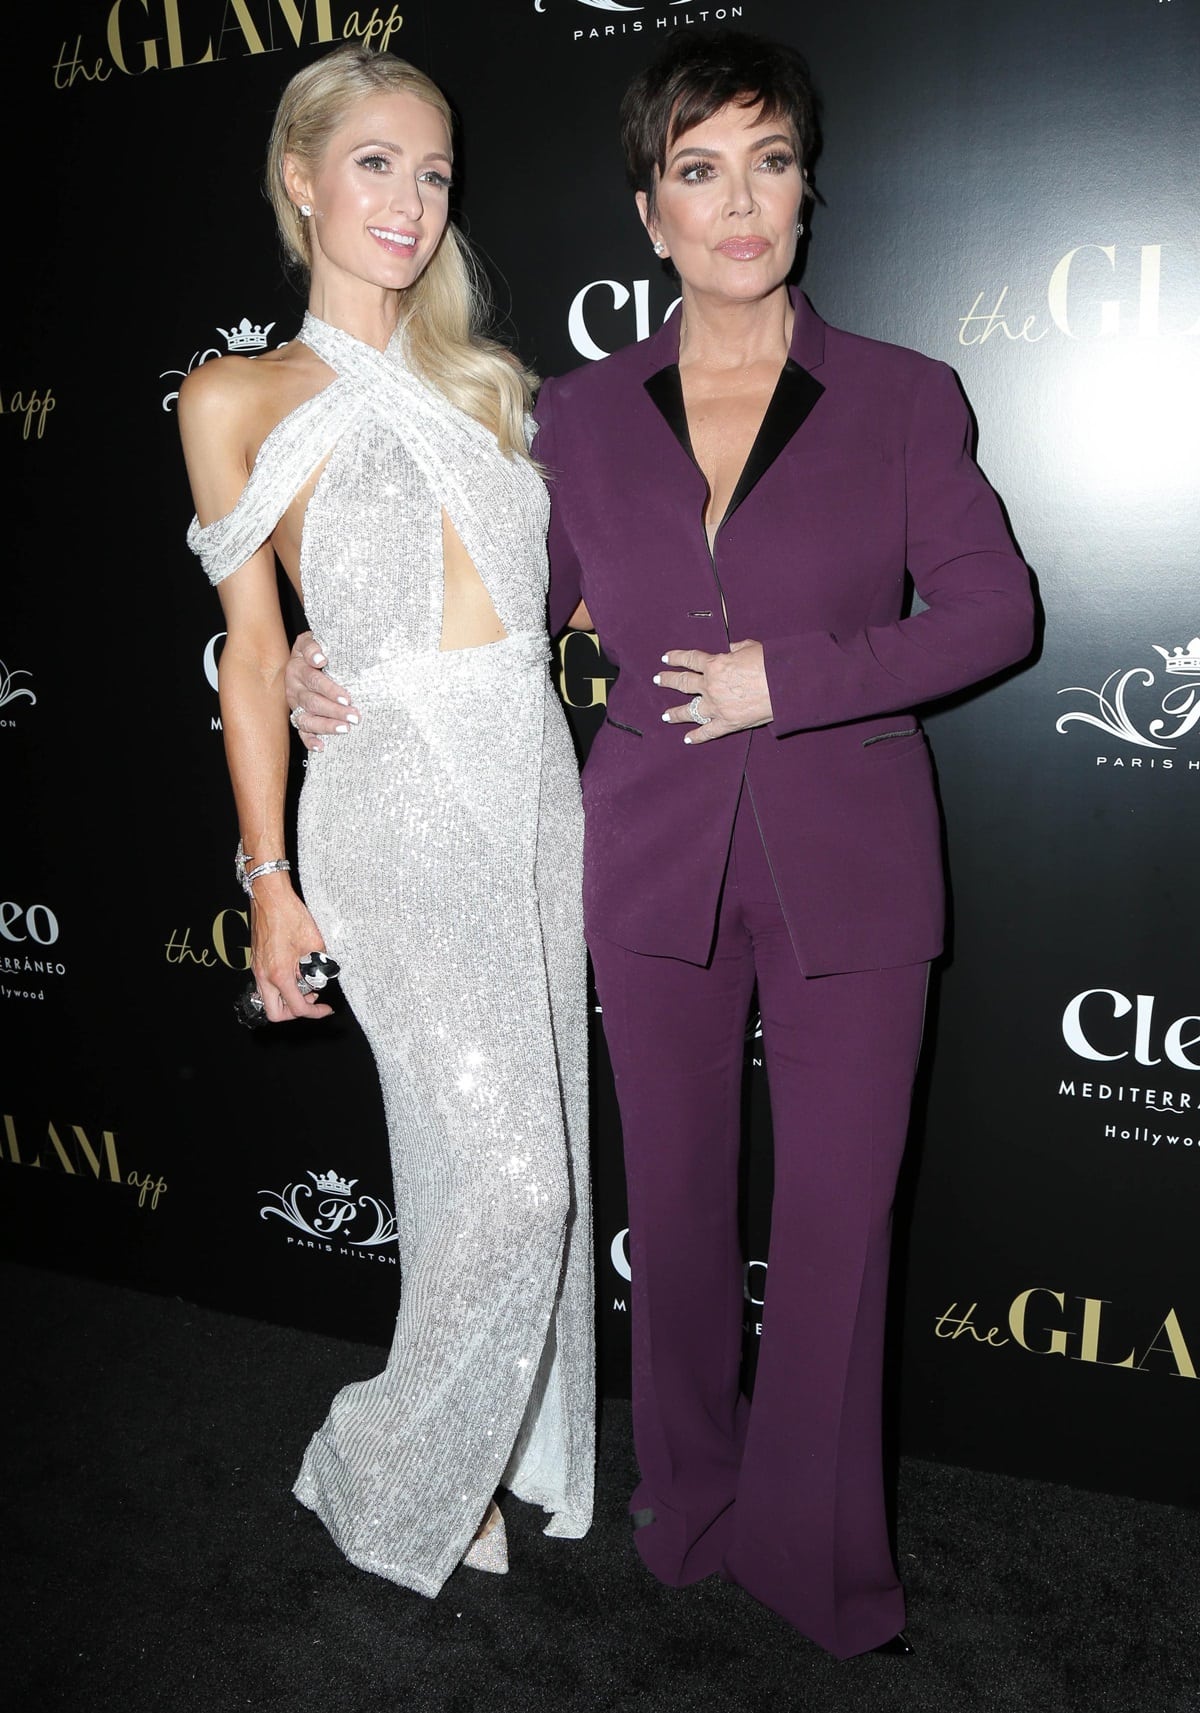 At the Paris Hilton + The Glam App Partnership Event in Hollywood, California, on June 19, 2019, Paris Hilton, standing at 5ft 7 inches (170.2 cm), was notably taller than Kris Jenner, whose height measures between 5ft 5 ½ inches (166.4 cm) and her peak height of 5ft 6 inches (167.6 cm)